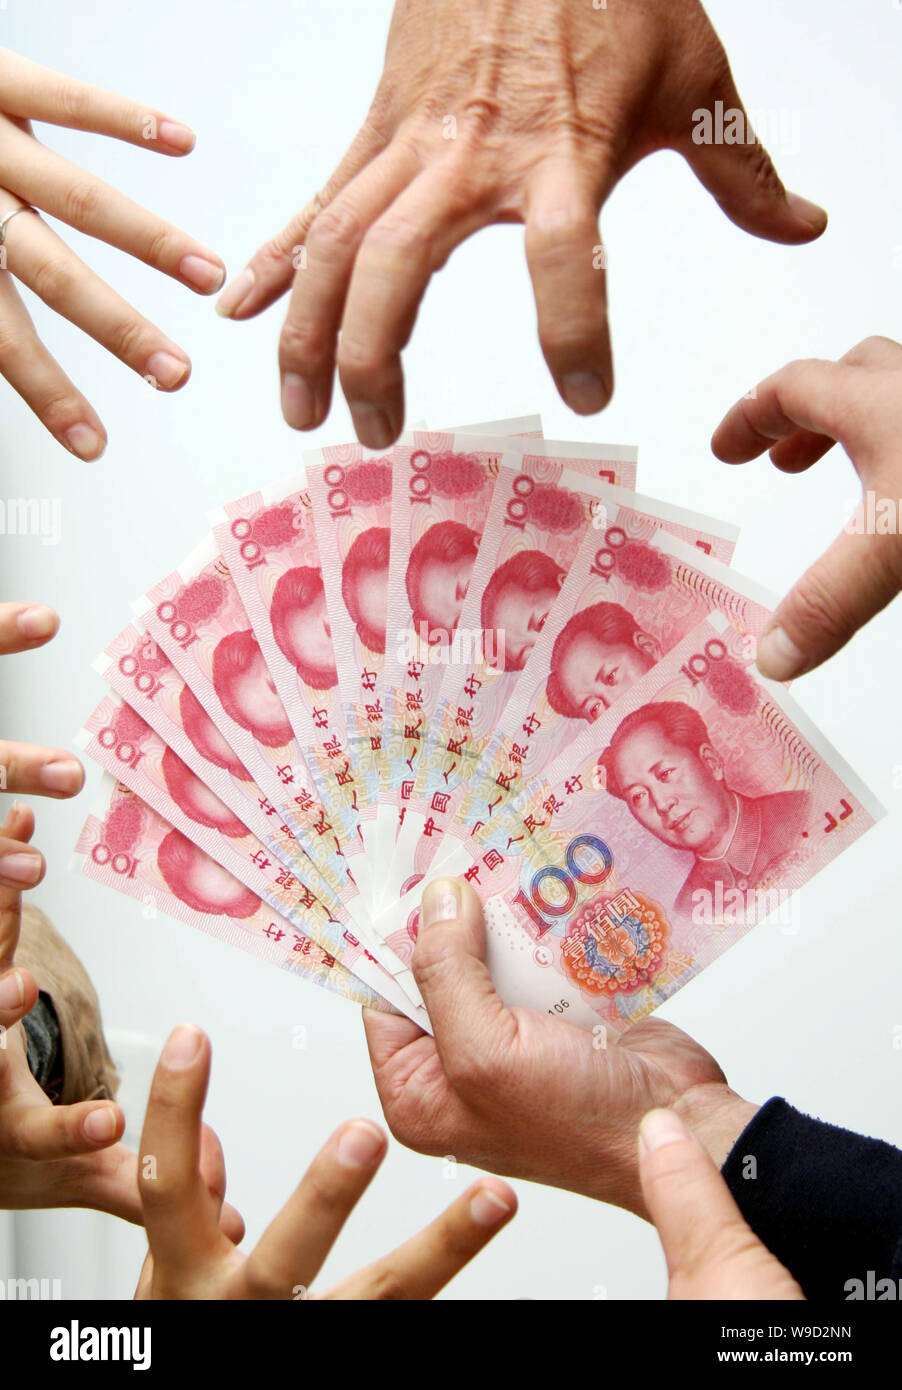 Creative photo   Keywords:China,Chinese,RMB,Renminbi,Yuan,CNY,money,bank,note,banknote,paper,currency,economy,finance,financial,hand,hands,finger,fing Stock Photo